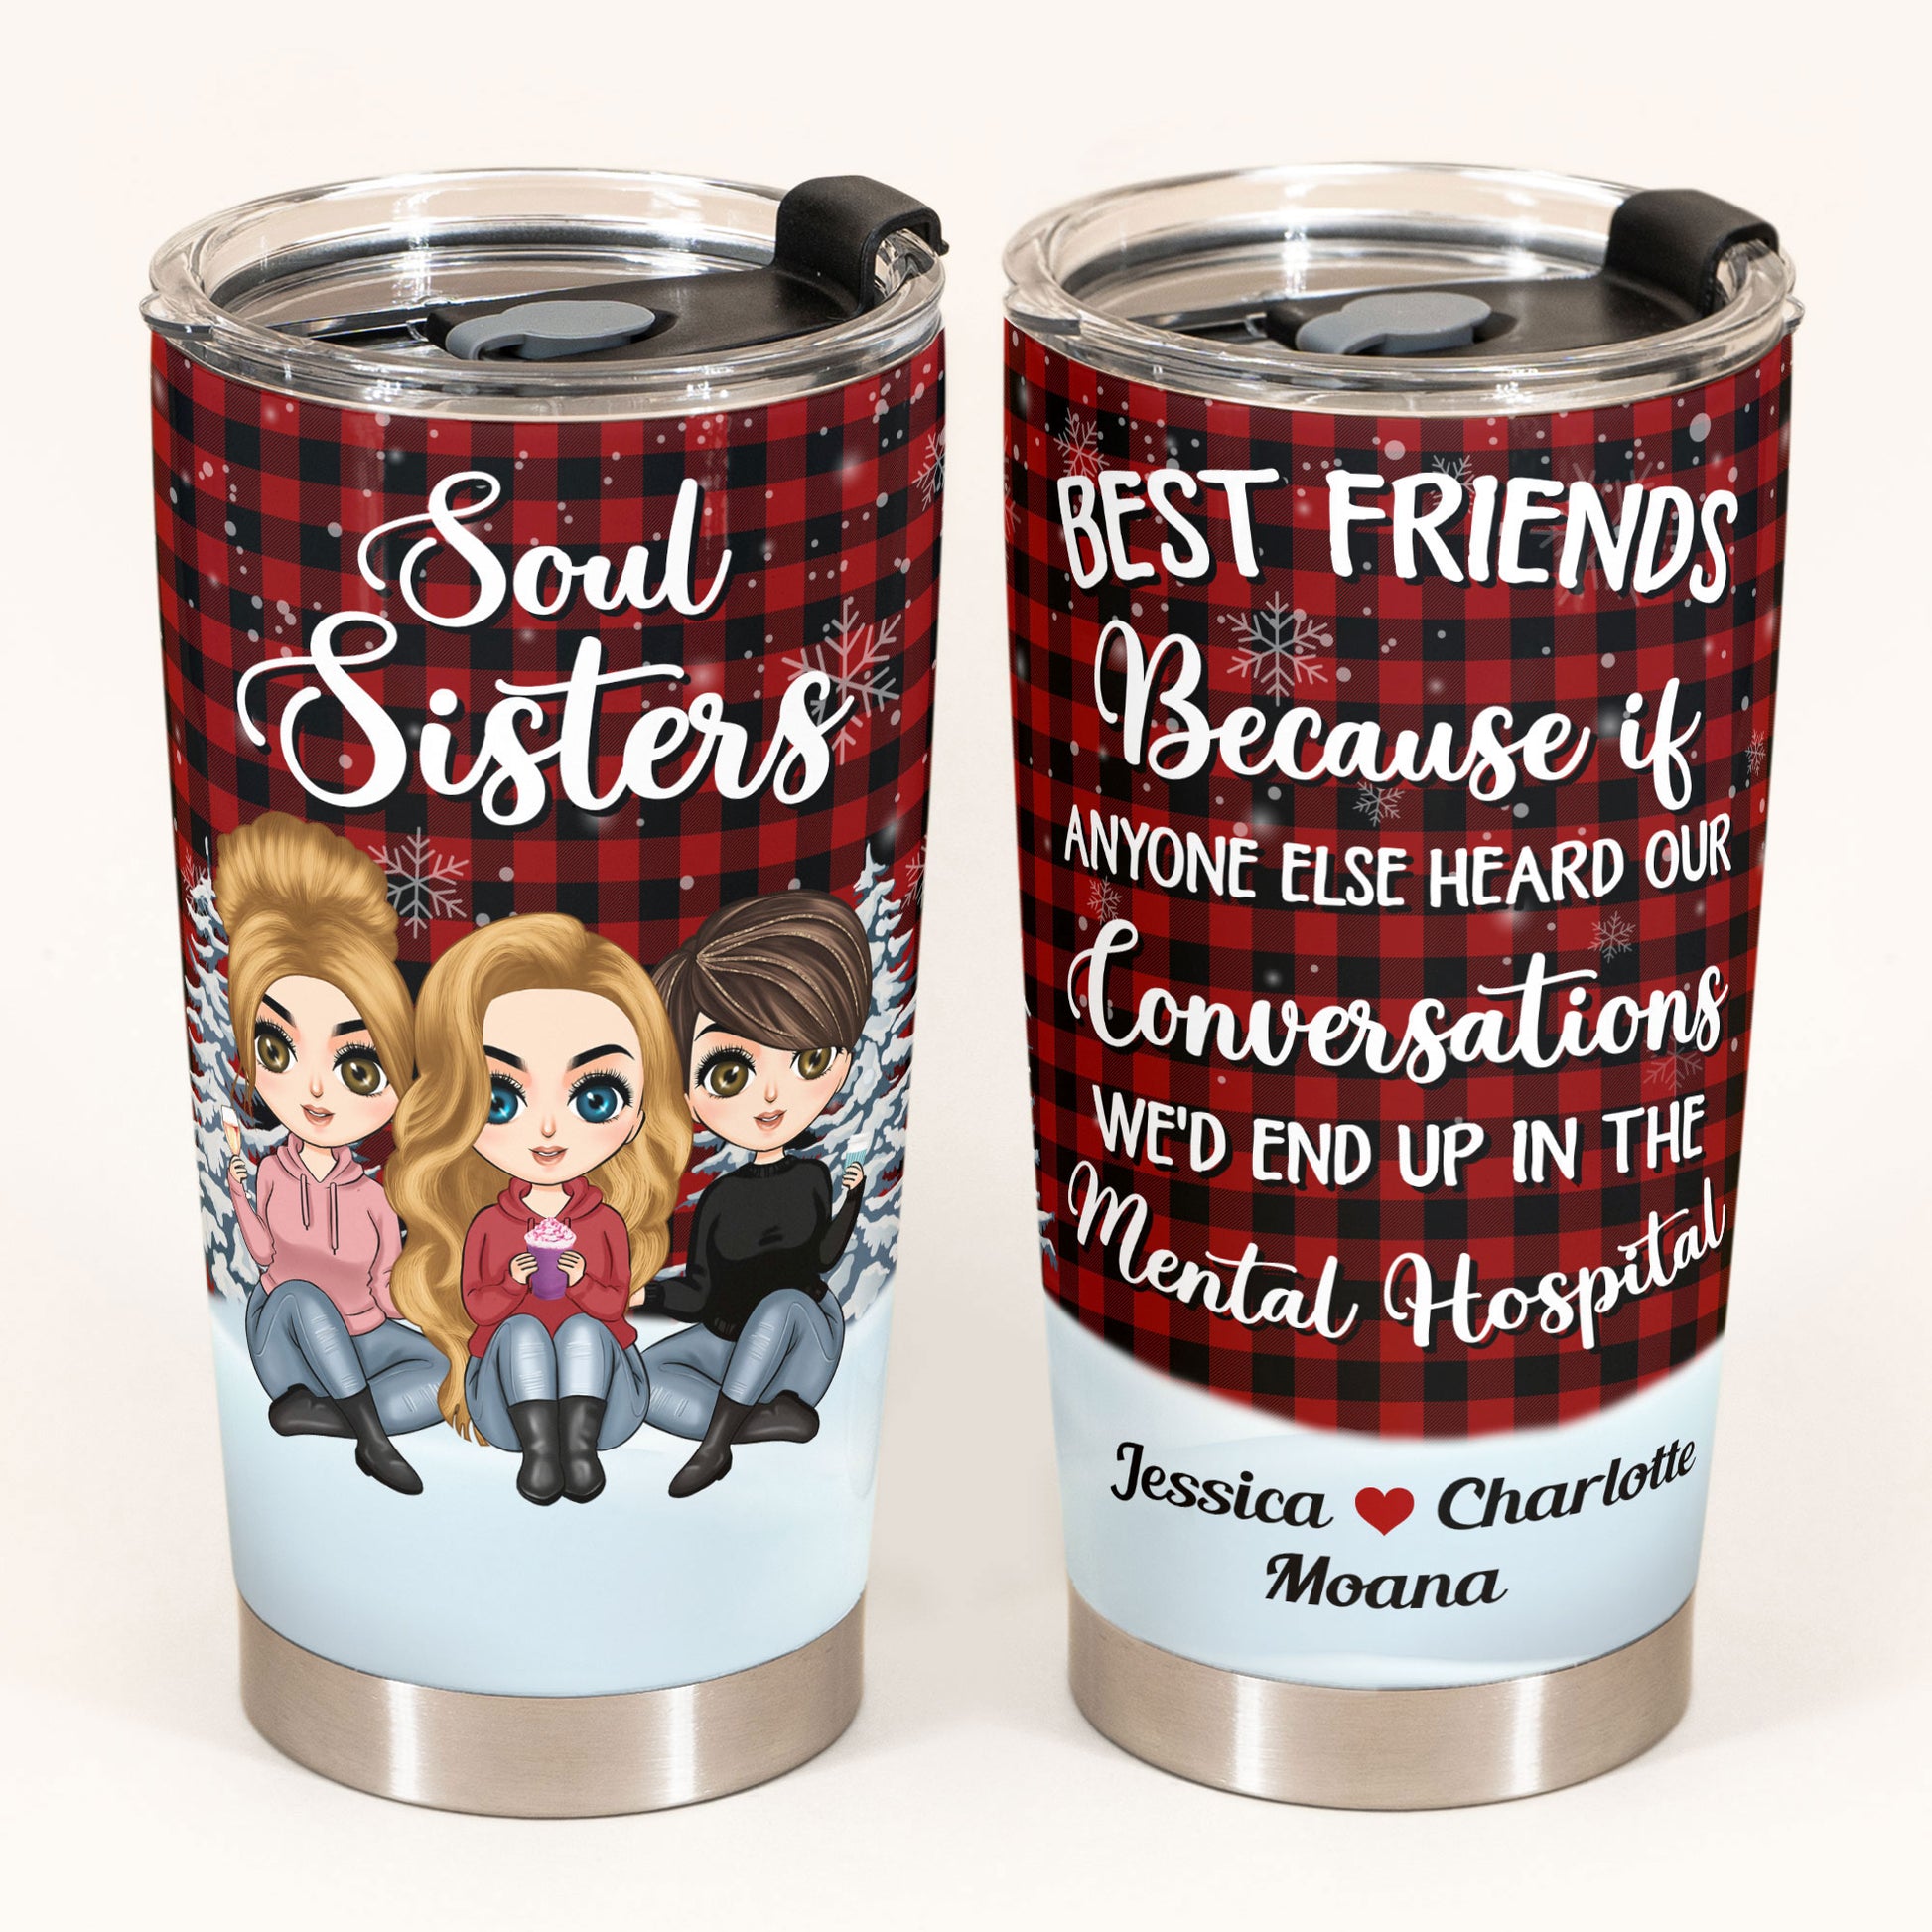 Soul Sister - Personalized Tumbler Cup - Birthday Gift For Bestie